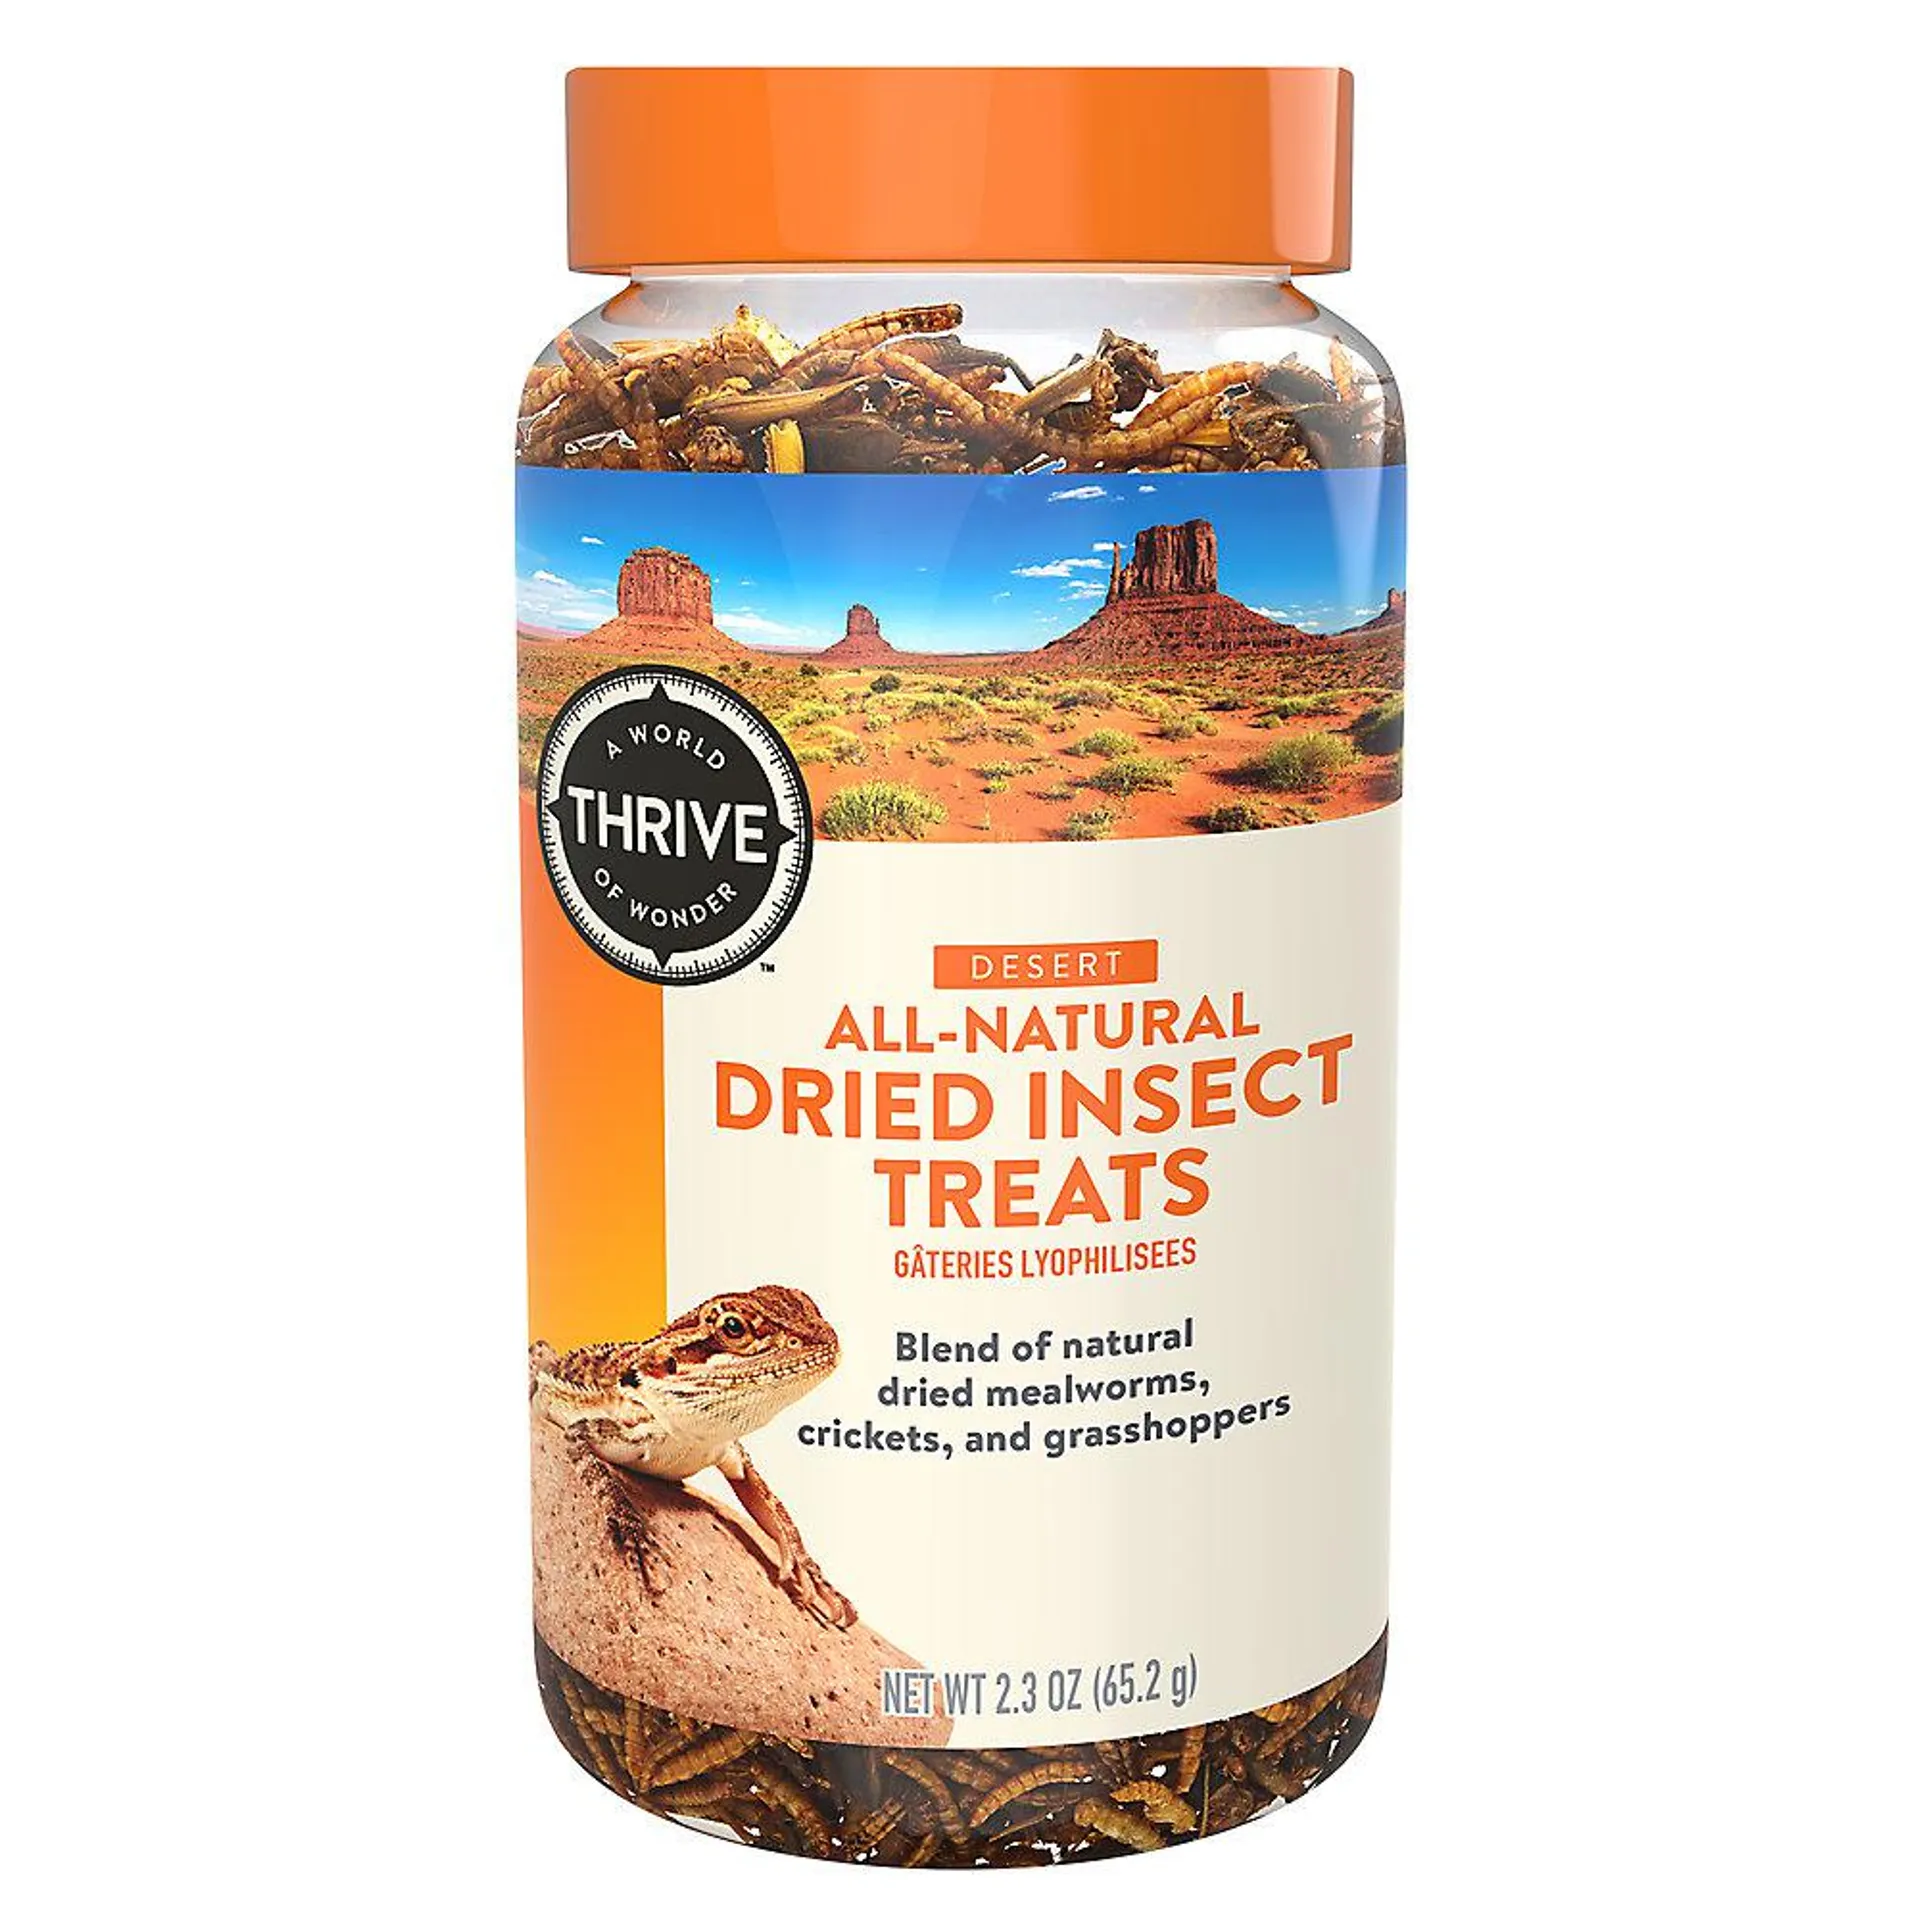 Thrive Dried Insect Reptile Treats - Natural, Mealworms, Crickets & Grasshoppers